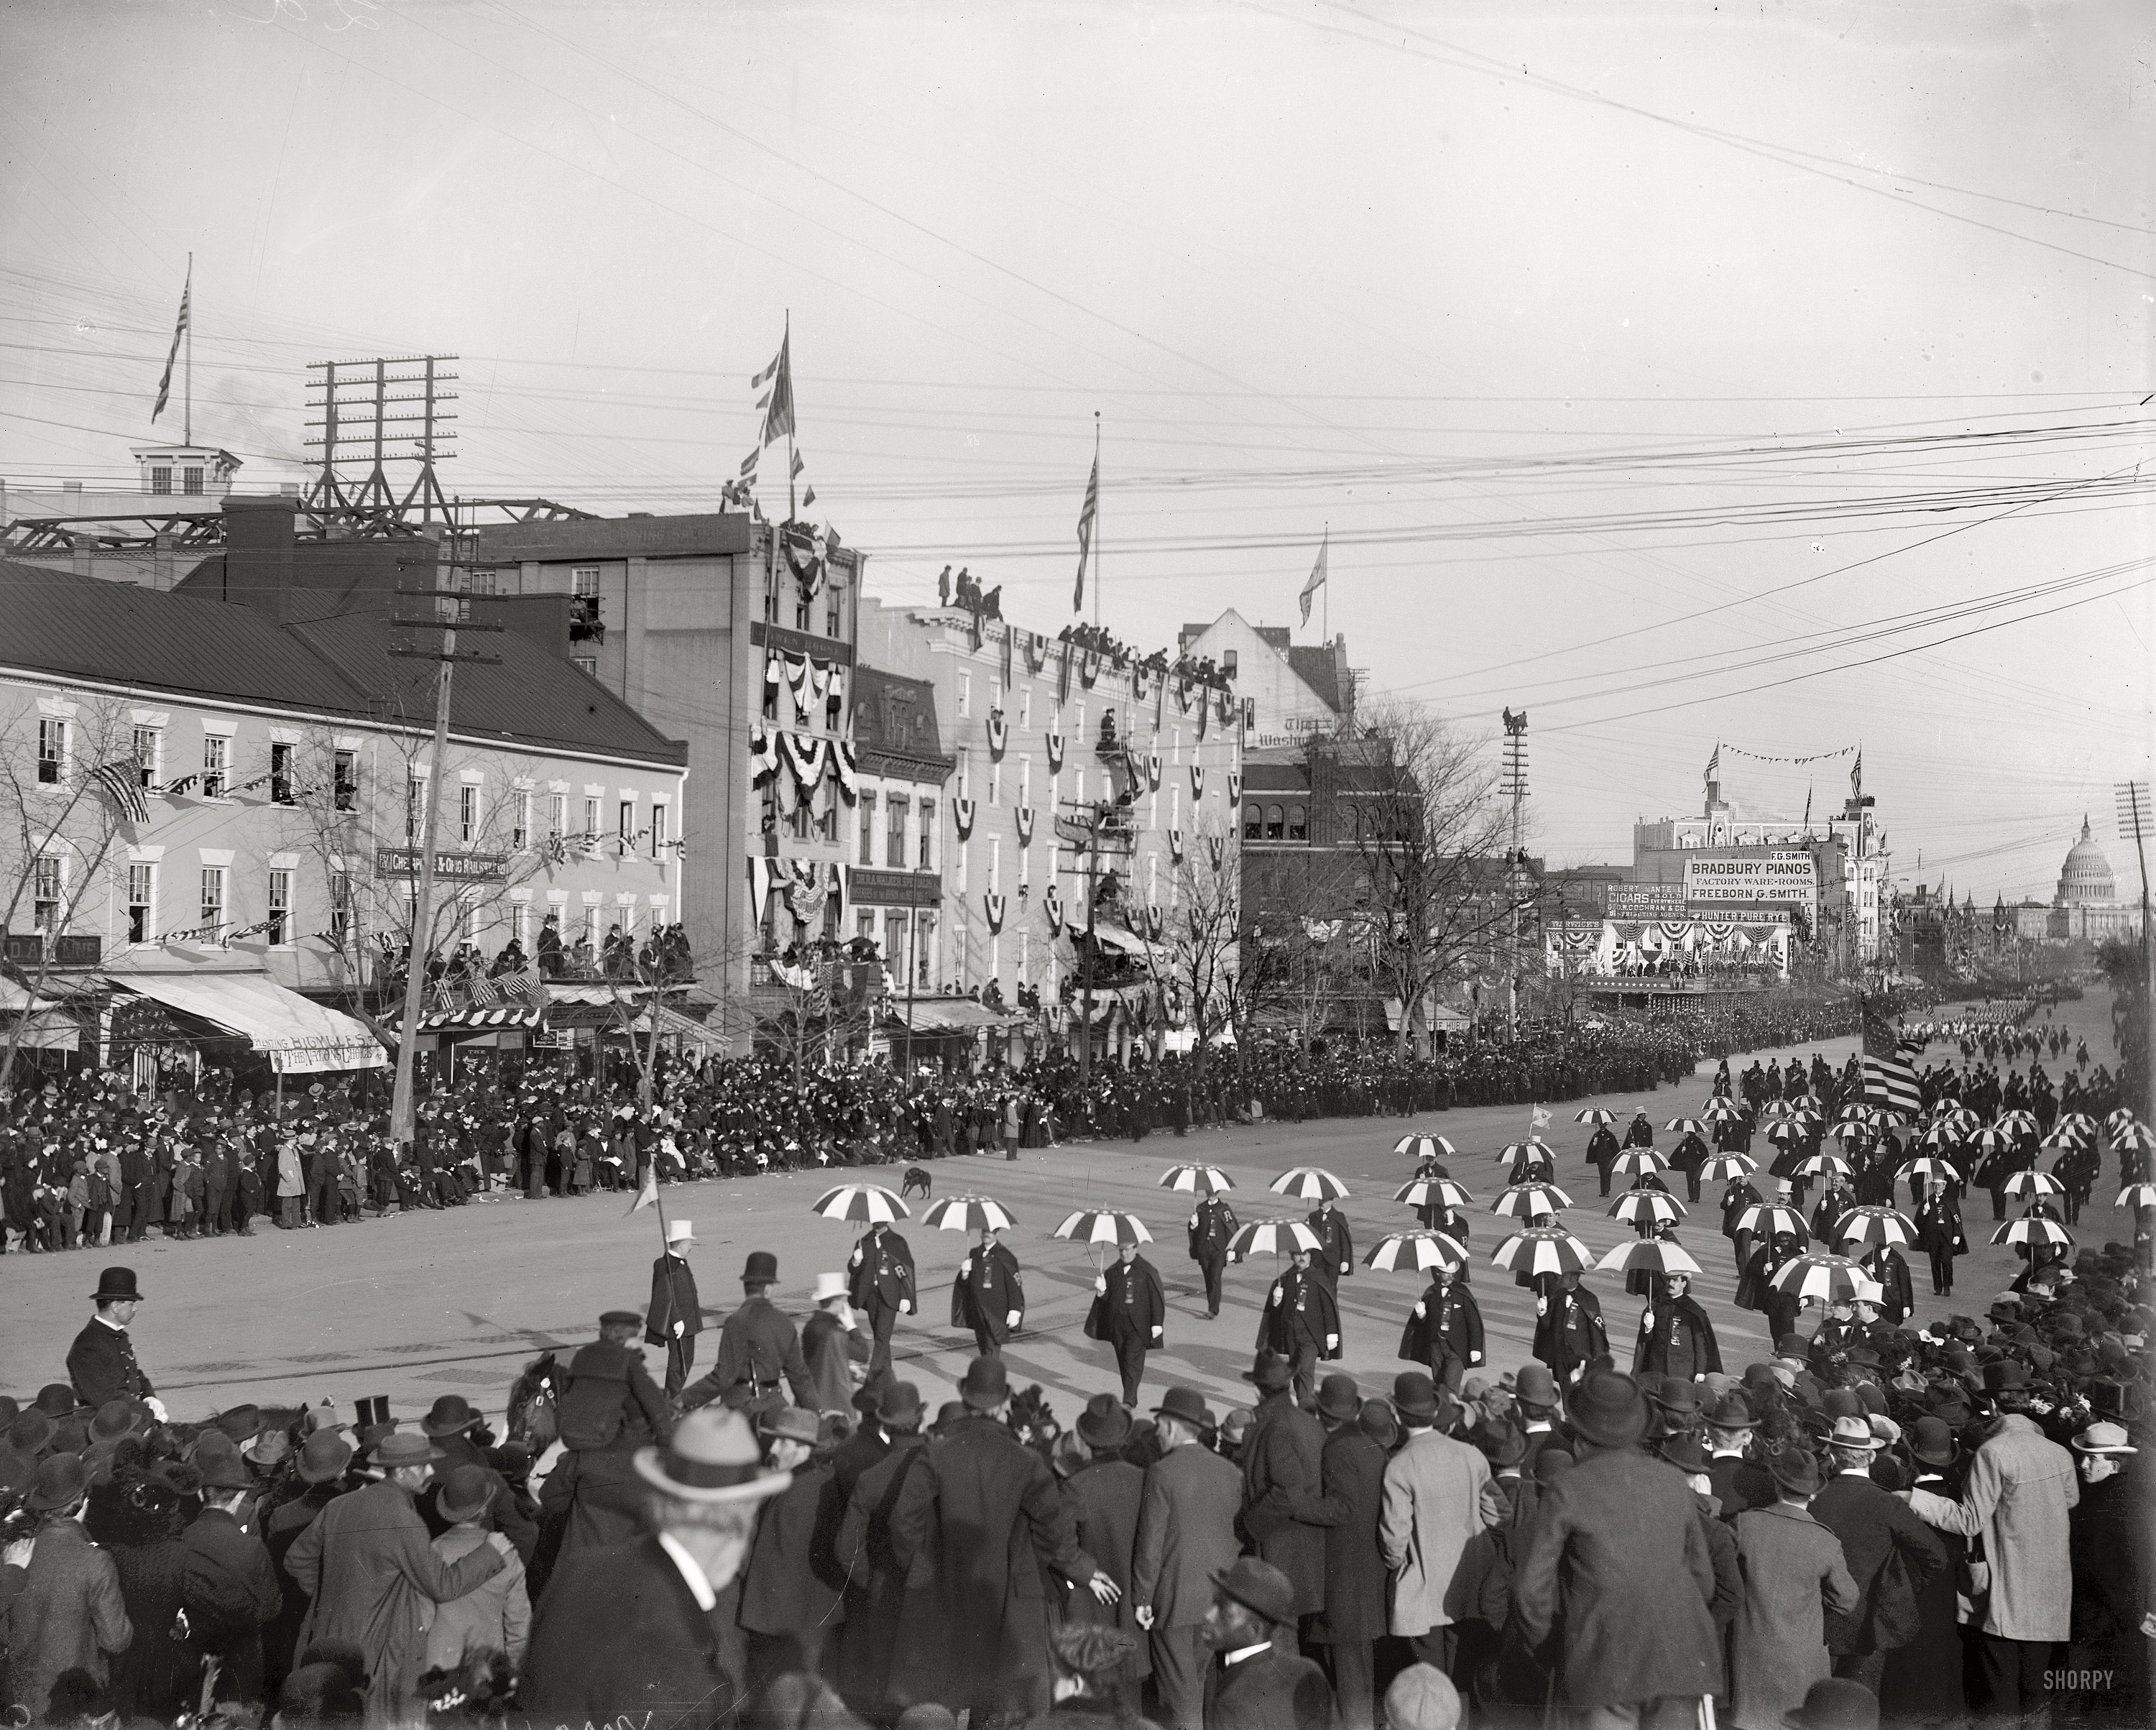 March 4, 1901. "President William McKinley second inaugural parade, Pennsylvania Avenue." Brady-Handy Collection glass negative. View full size.